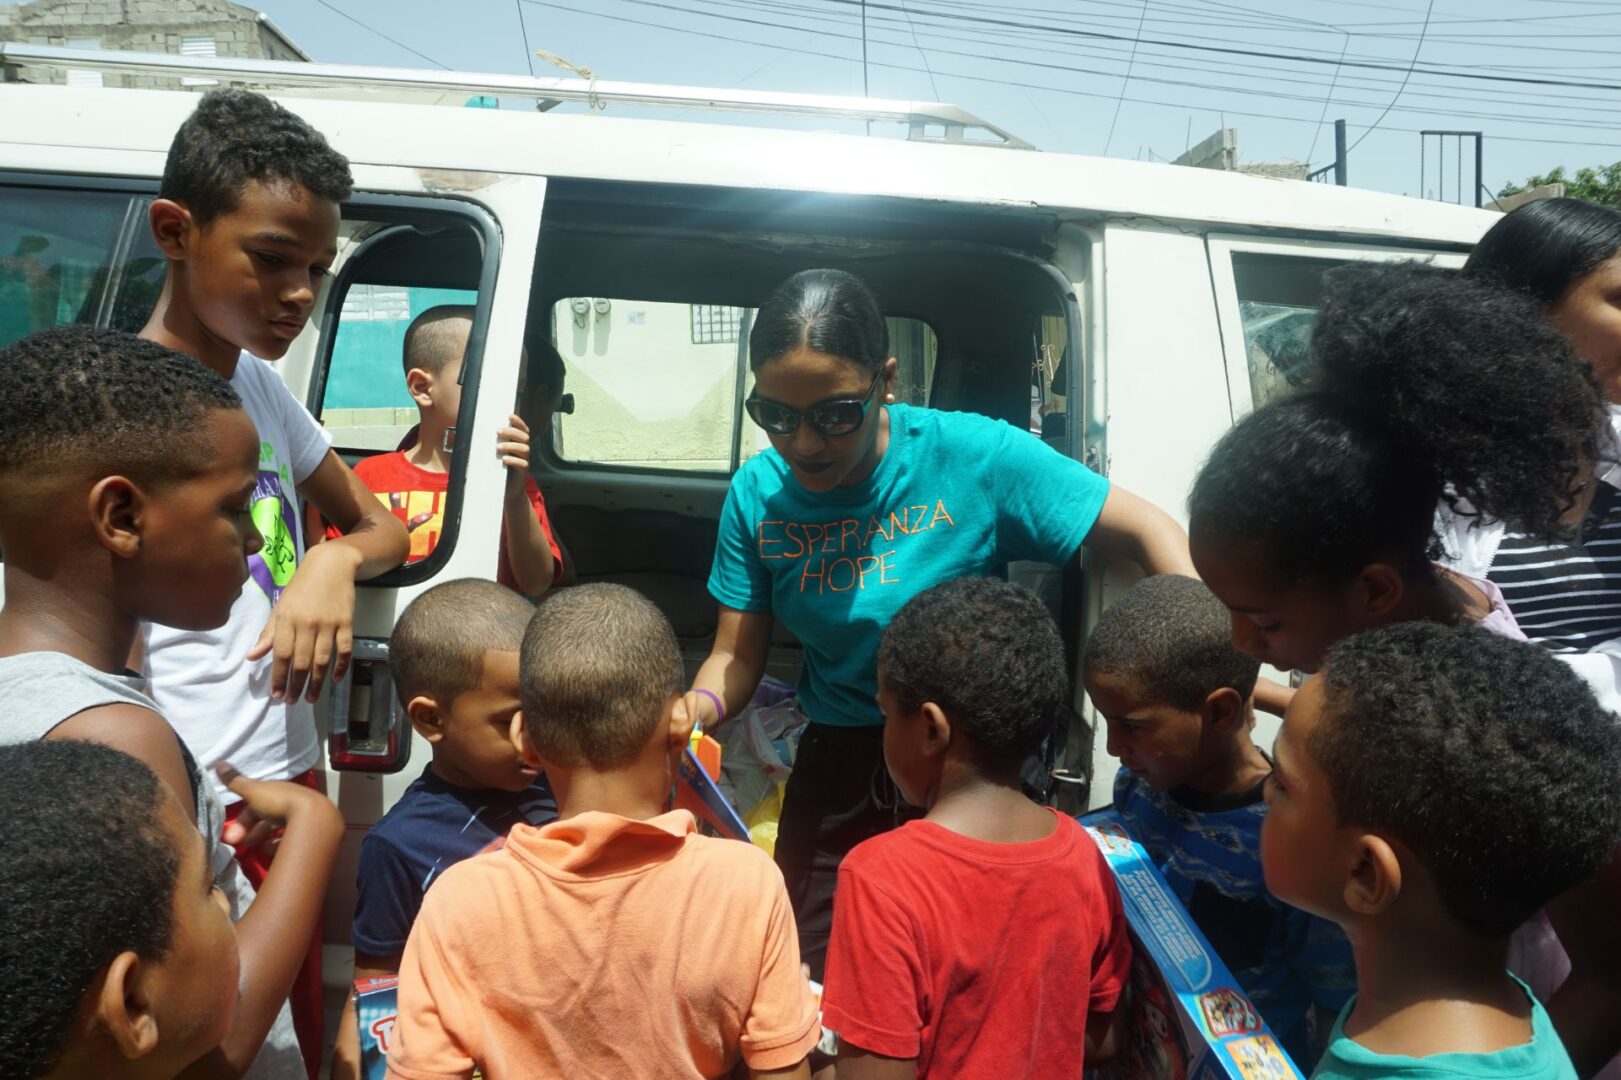 A staff in blue shirt outside the car, crowed by children